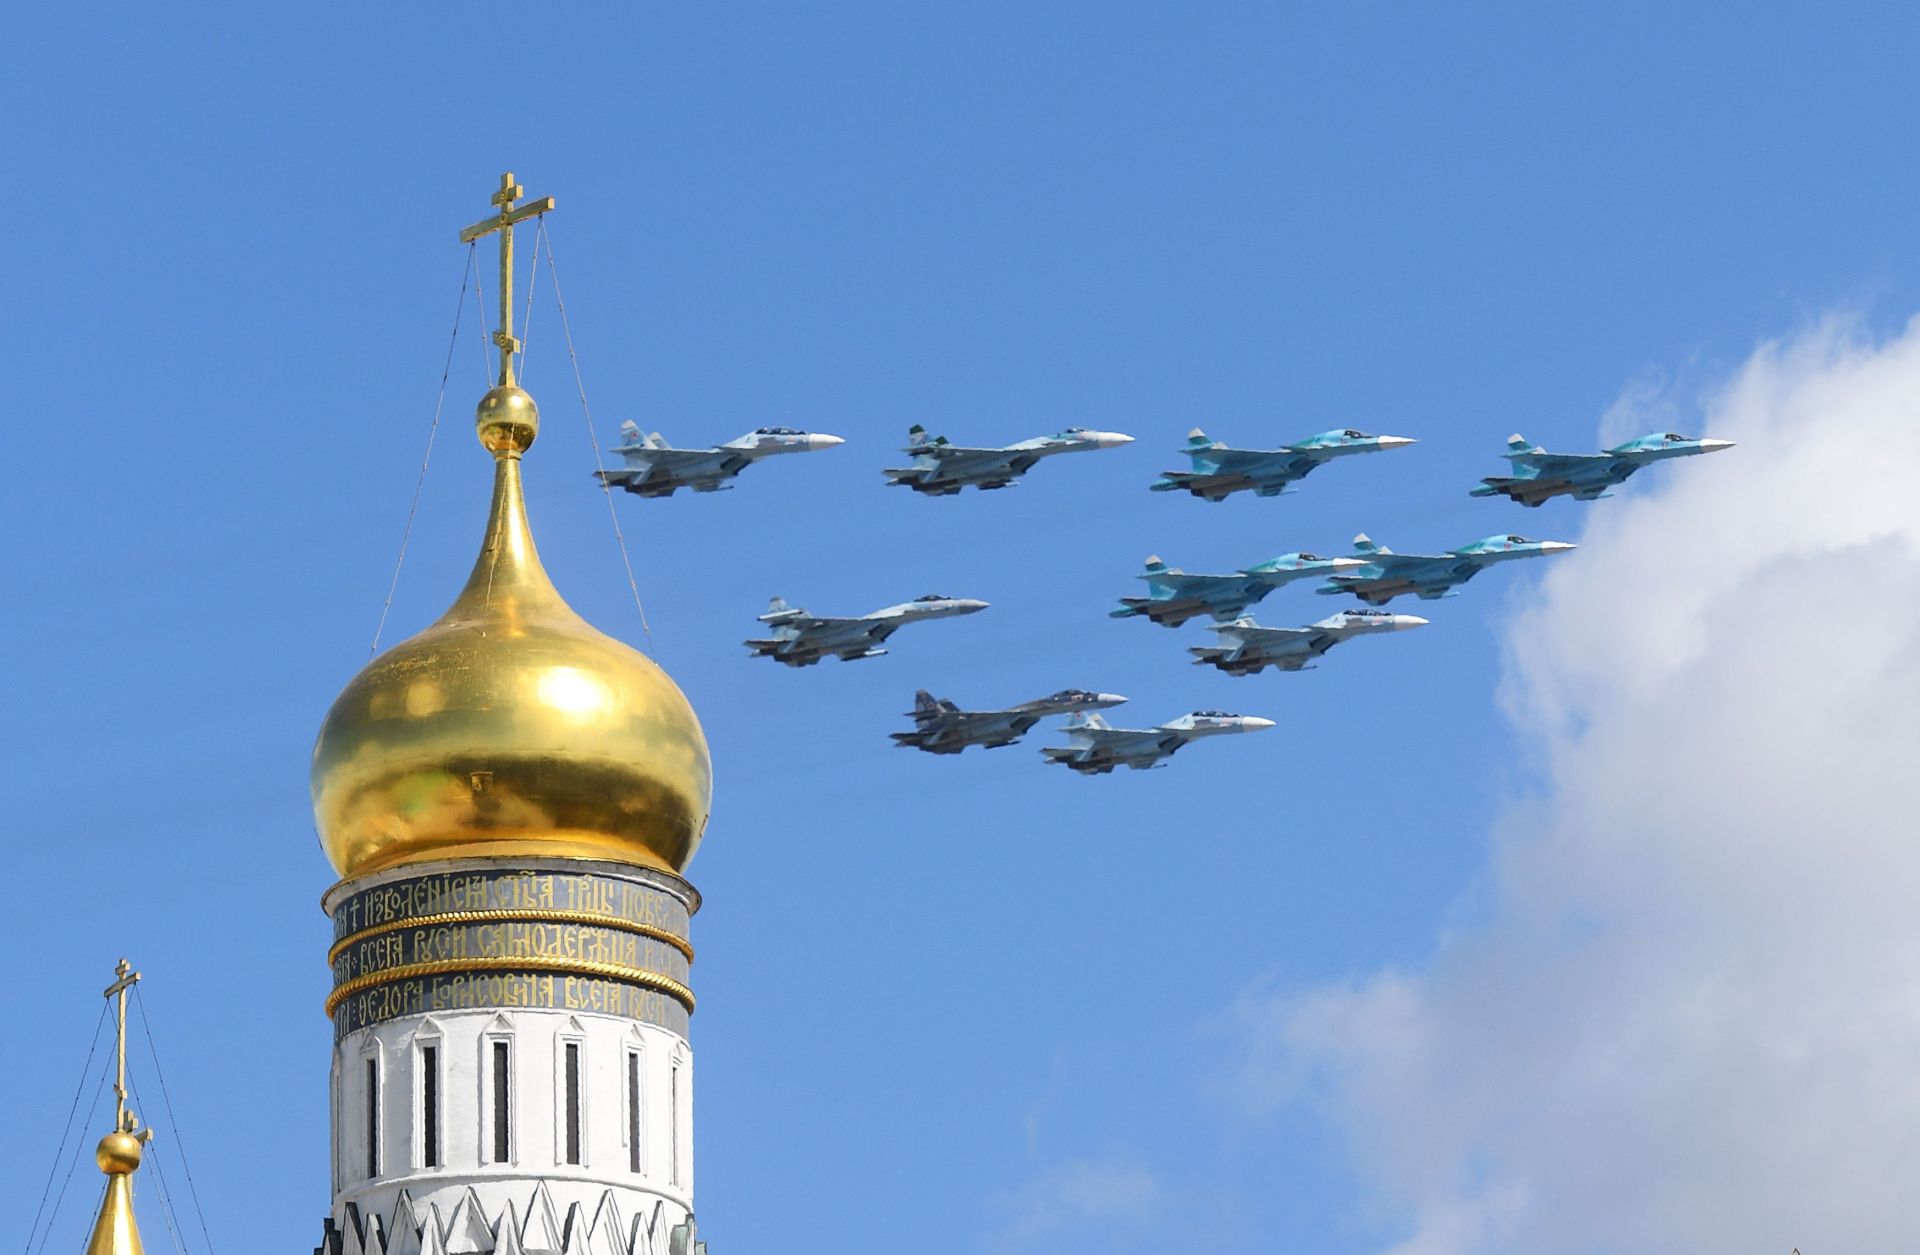 Russian Su-35 and Su-34 aircraft fly over central Moscow on May 4, 2017, during a rehearsal for the country's annual Victory Day military parade.